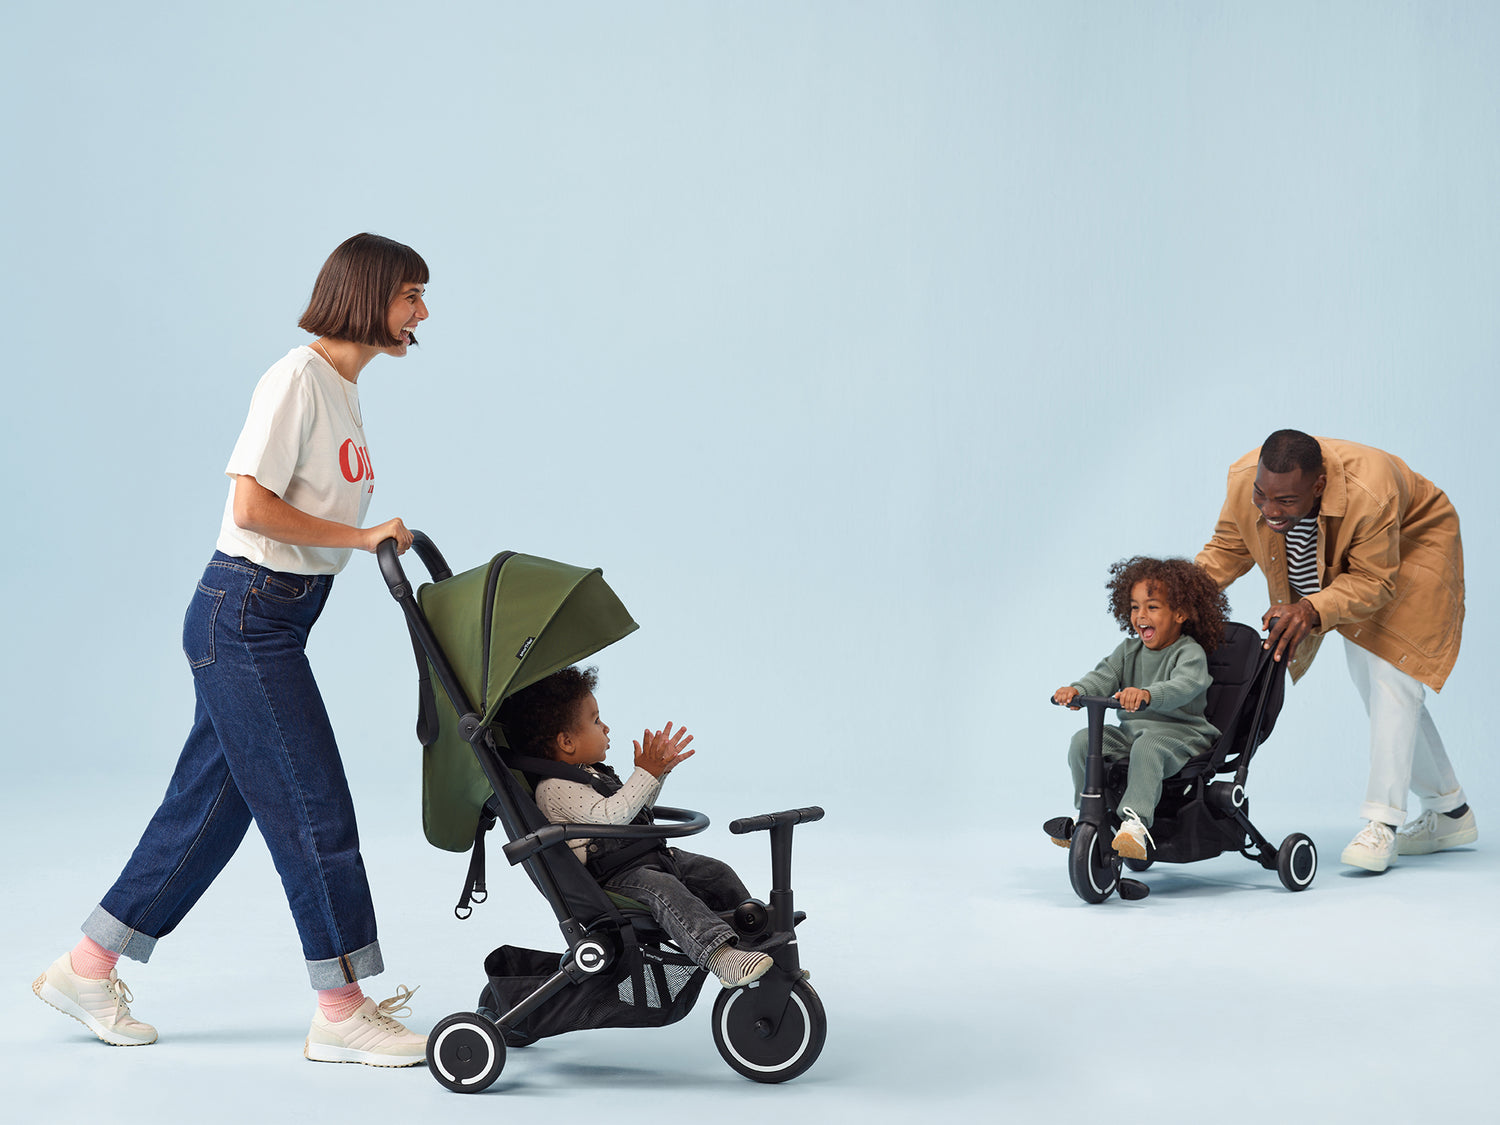 From stroller to trike in seconds